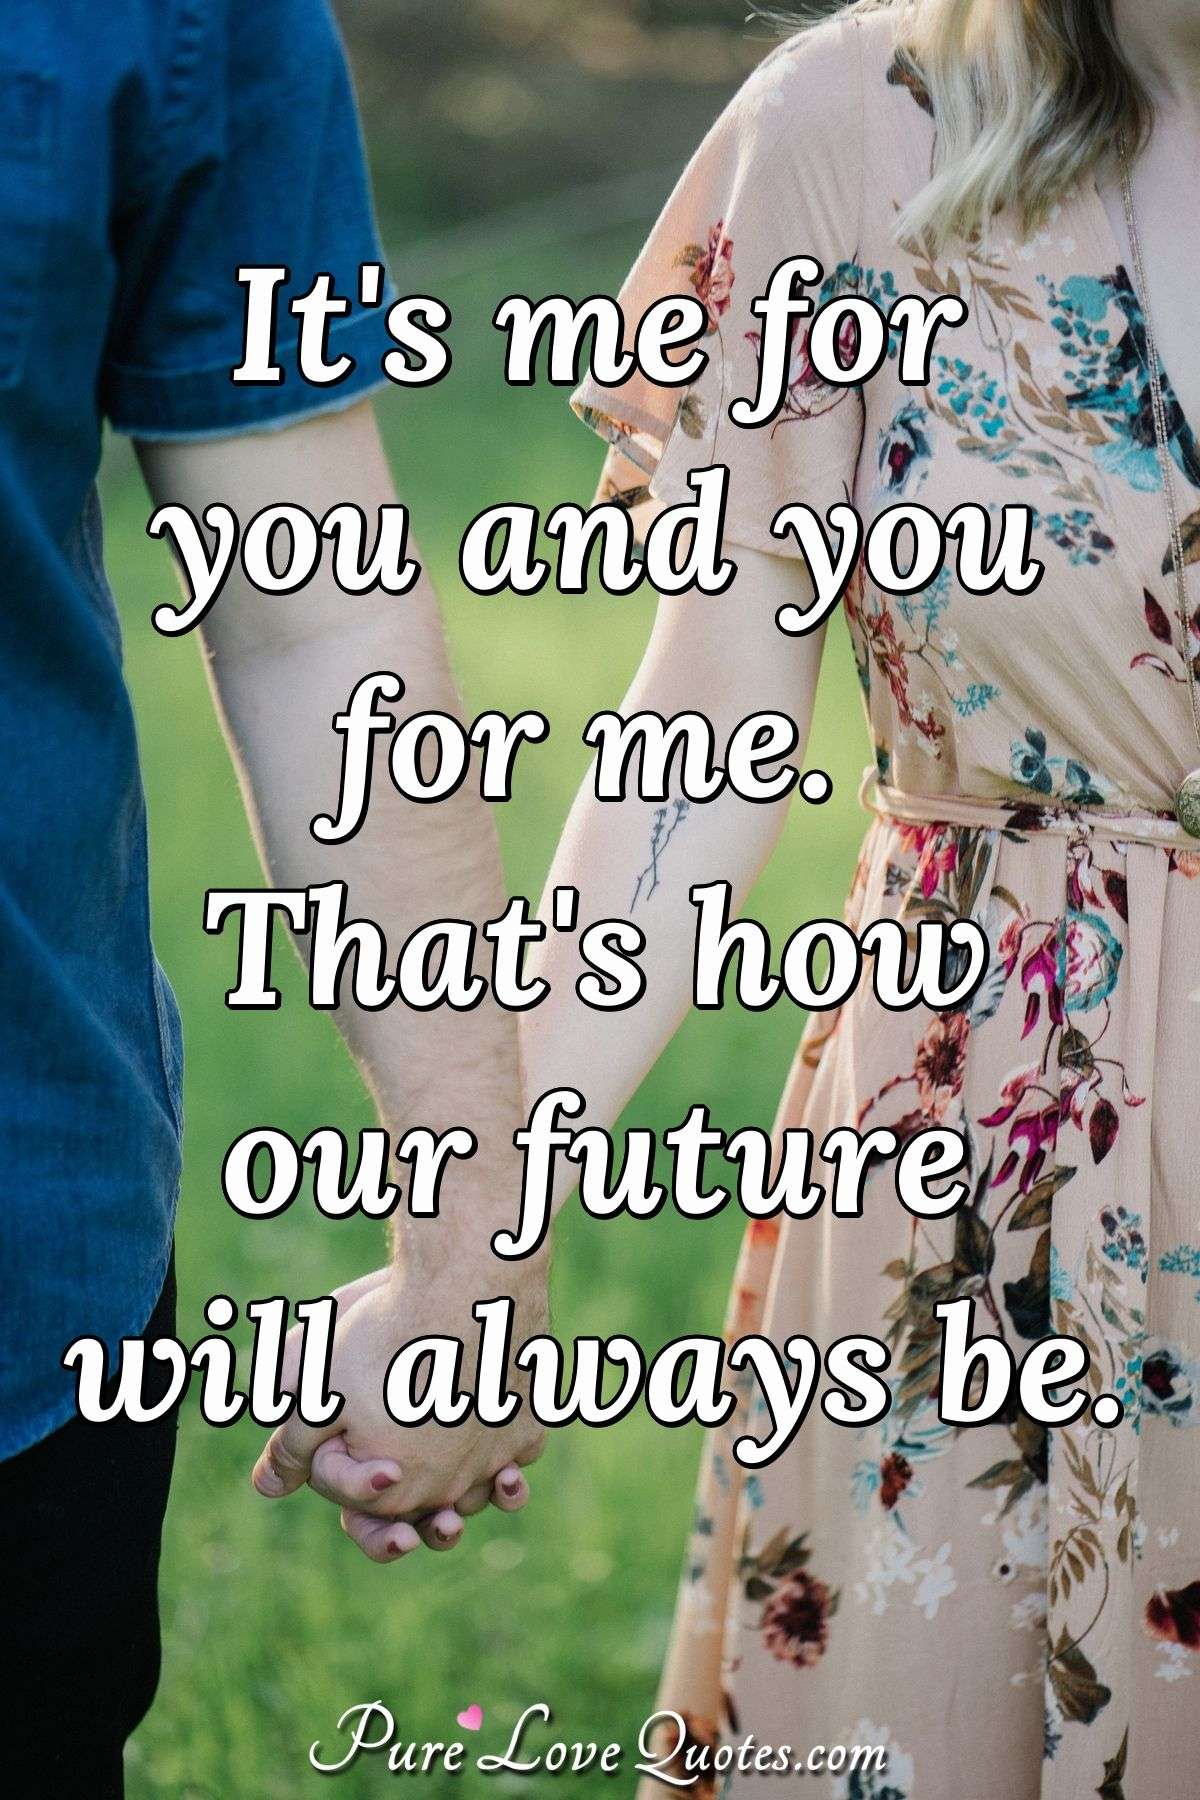 Romantic Love Quotes For Him To Express Your Feelings And Tell Him I Love You Purelovequotes